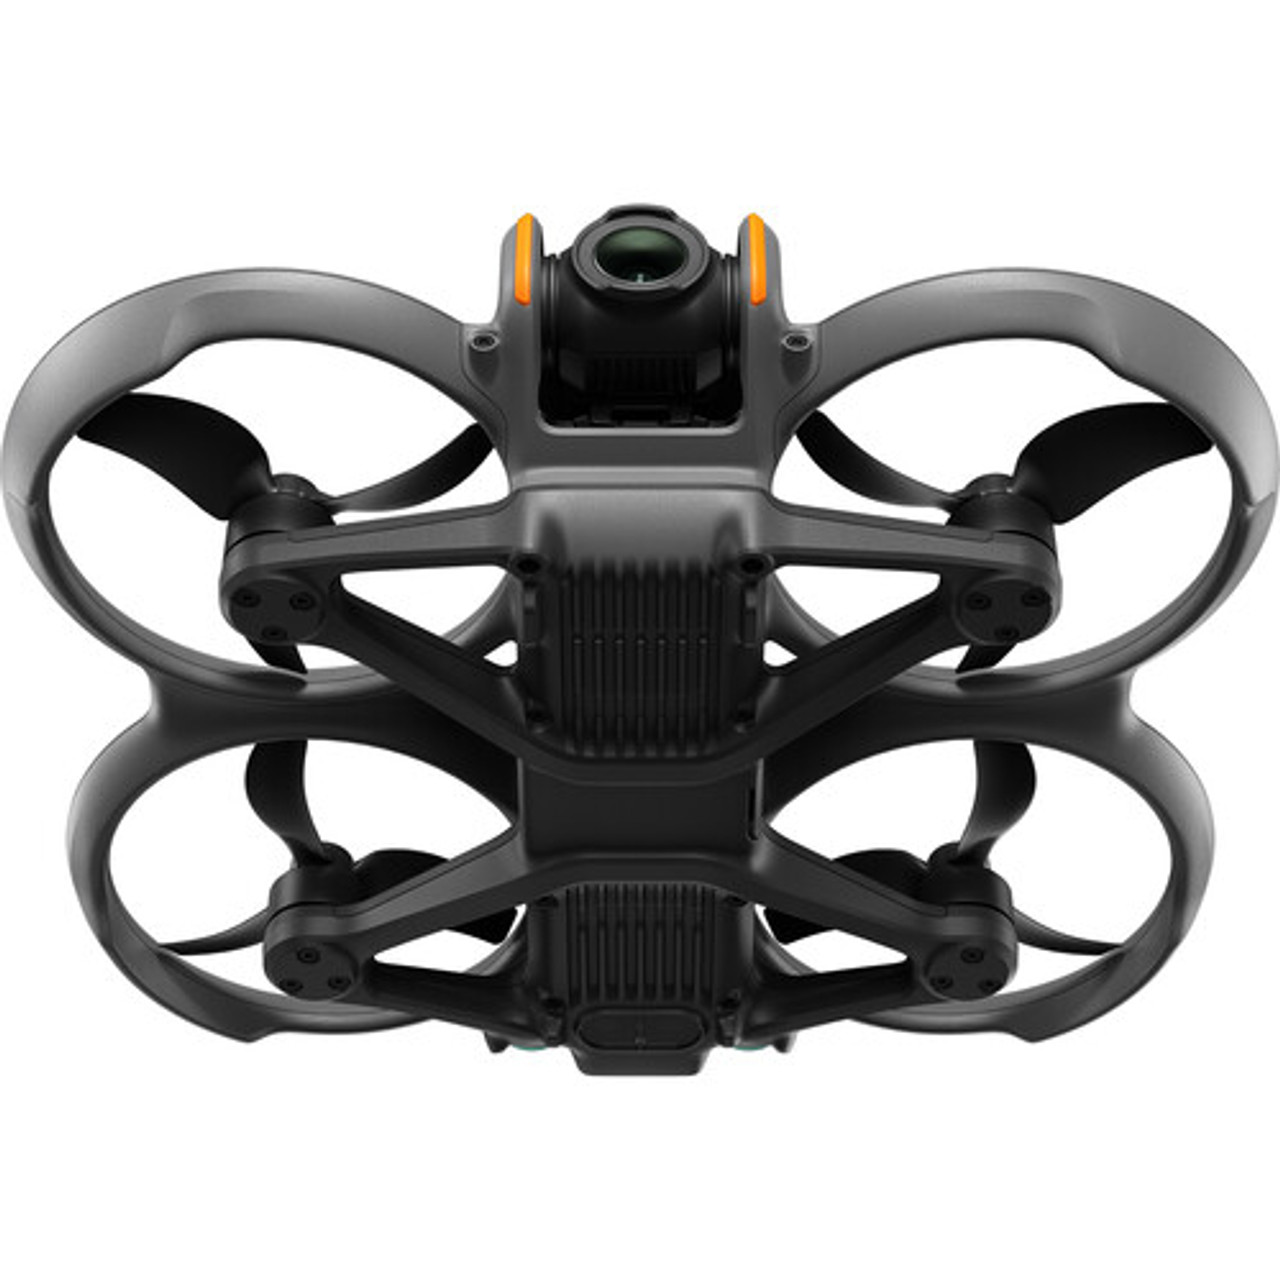 DJI Avata 2 Fly More Combo (3-Batteries, Goggles 3 & RC Motion 3)